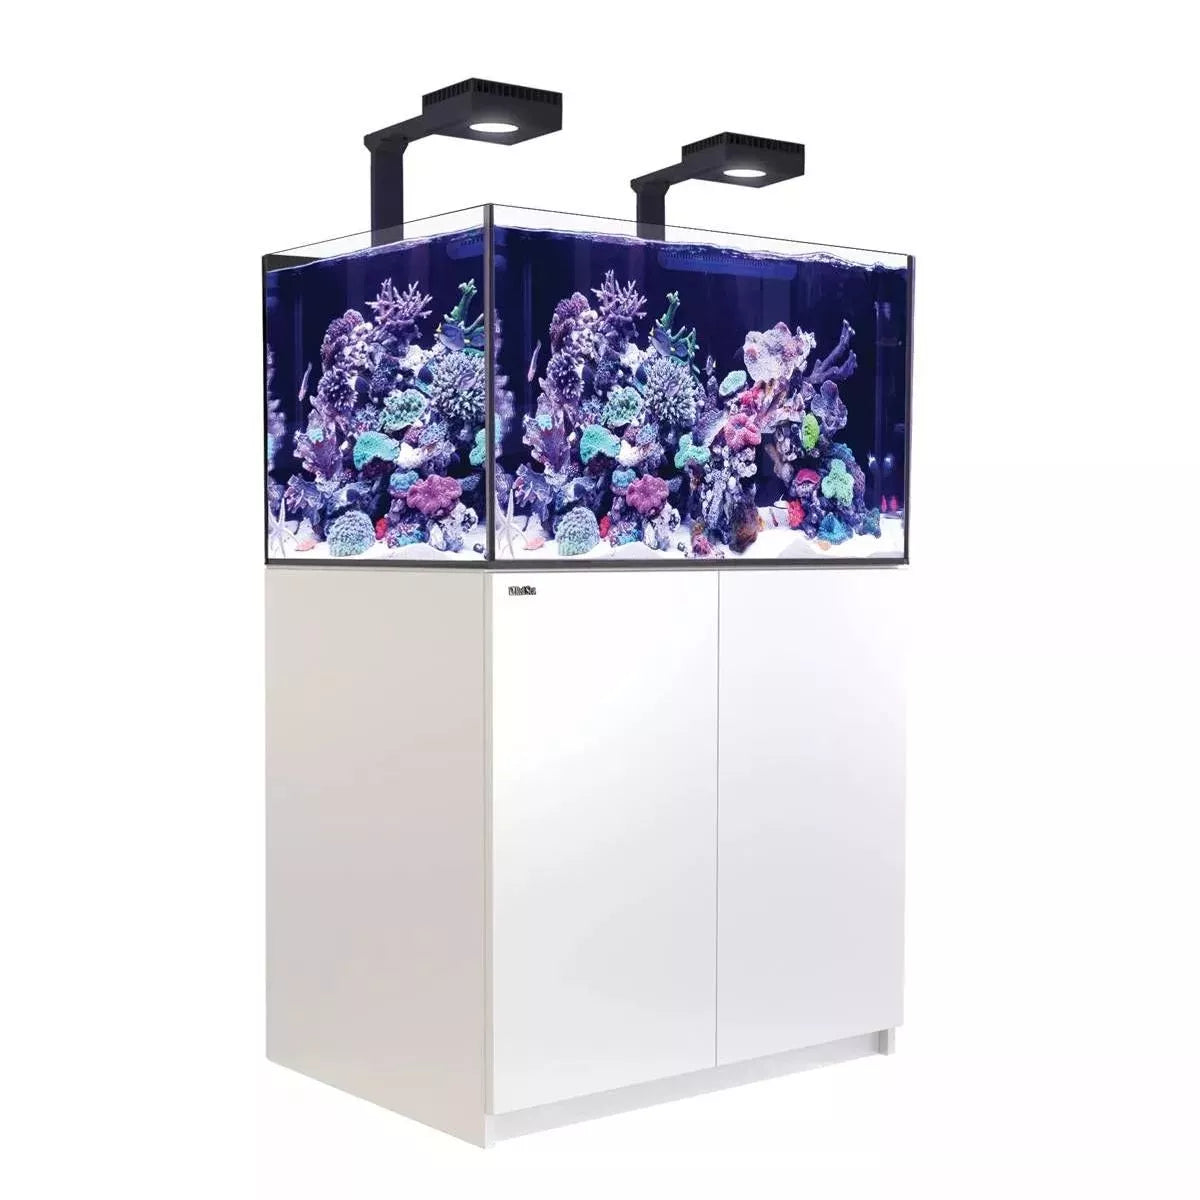 Reefer MAX 300 G2+ System (65 Gal) - Red Sea